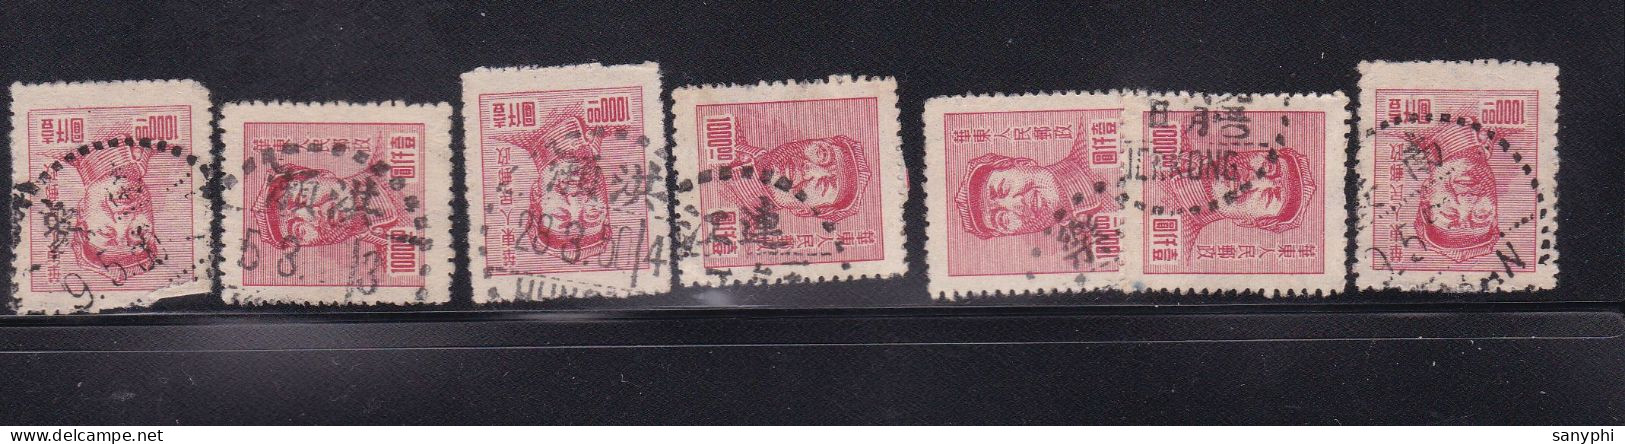 East China 1949 Mao 1000Yuan,7 Used Stamps - Unused Stamps